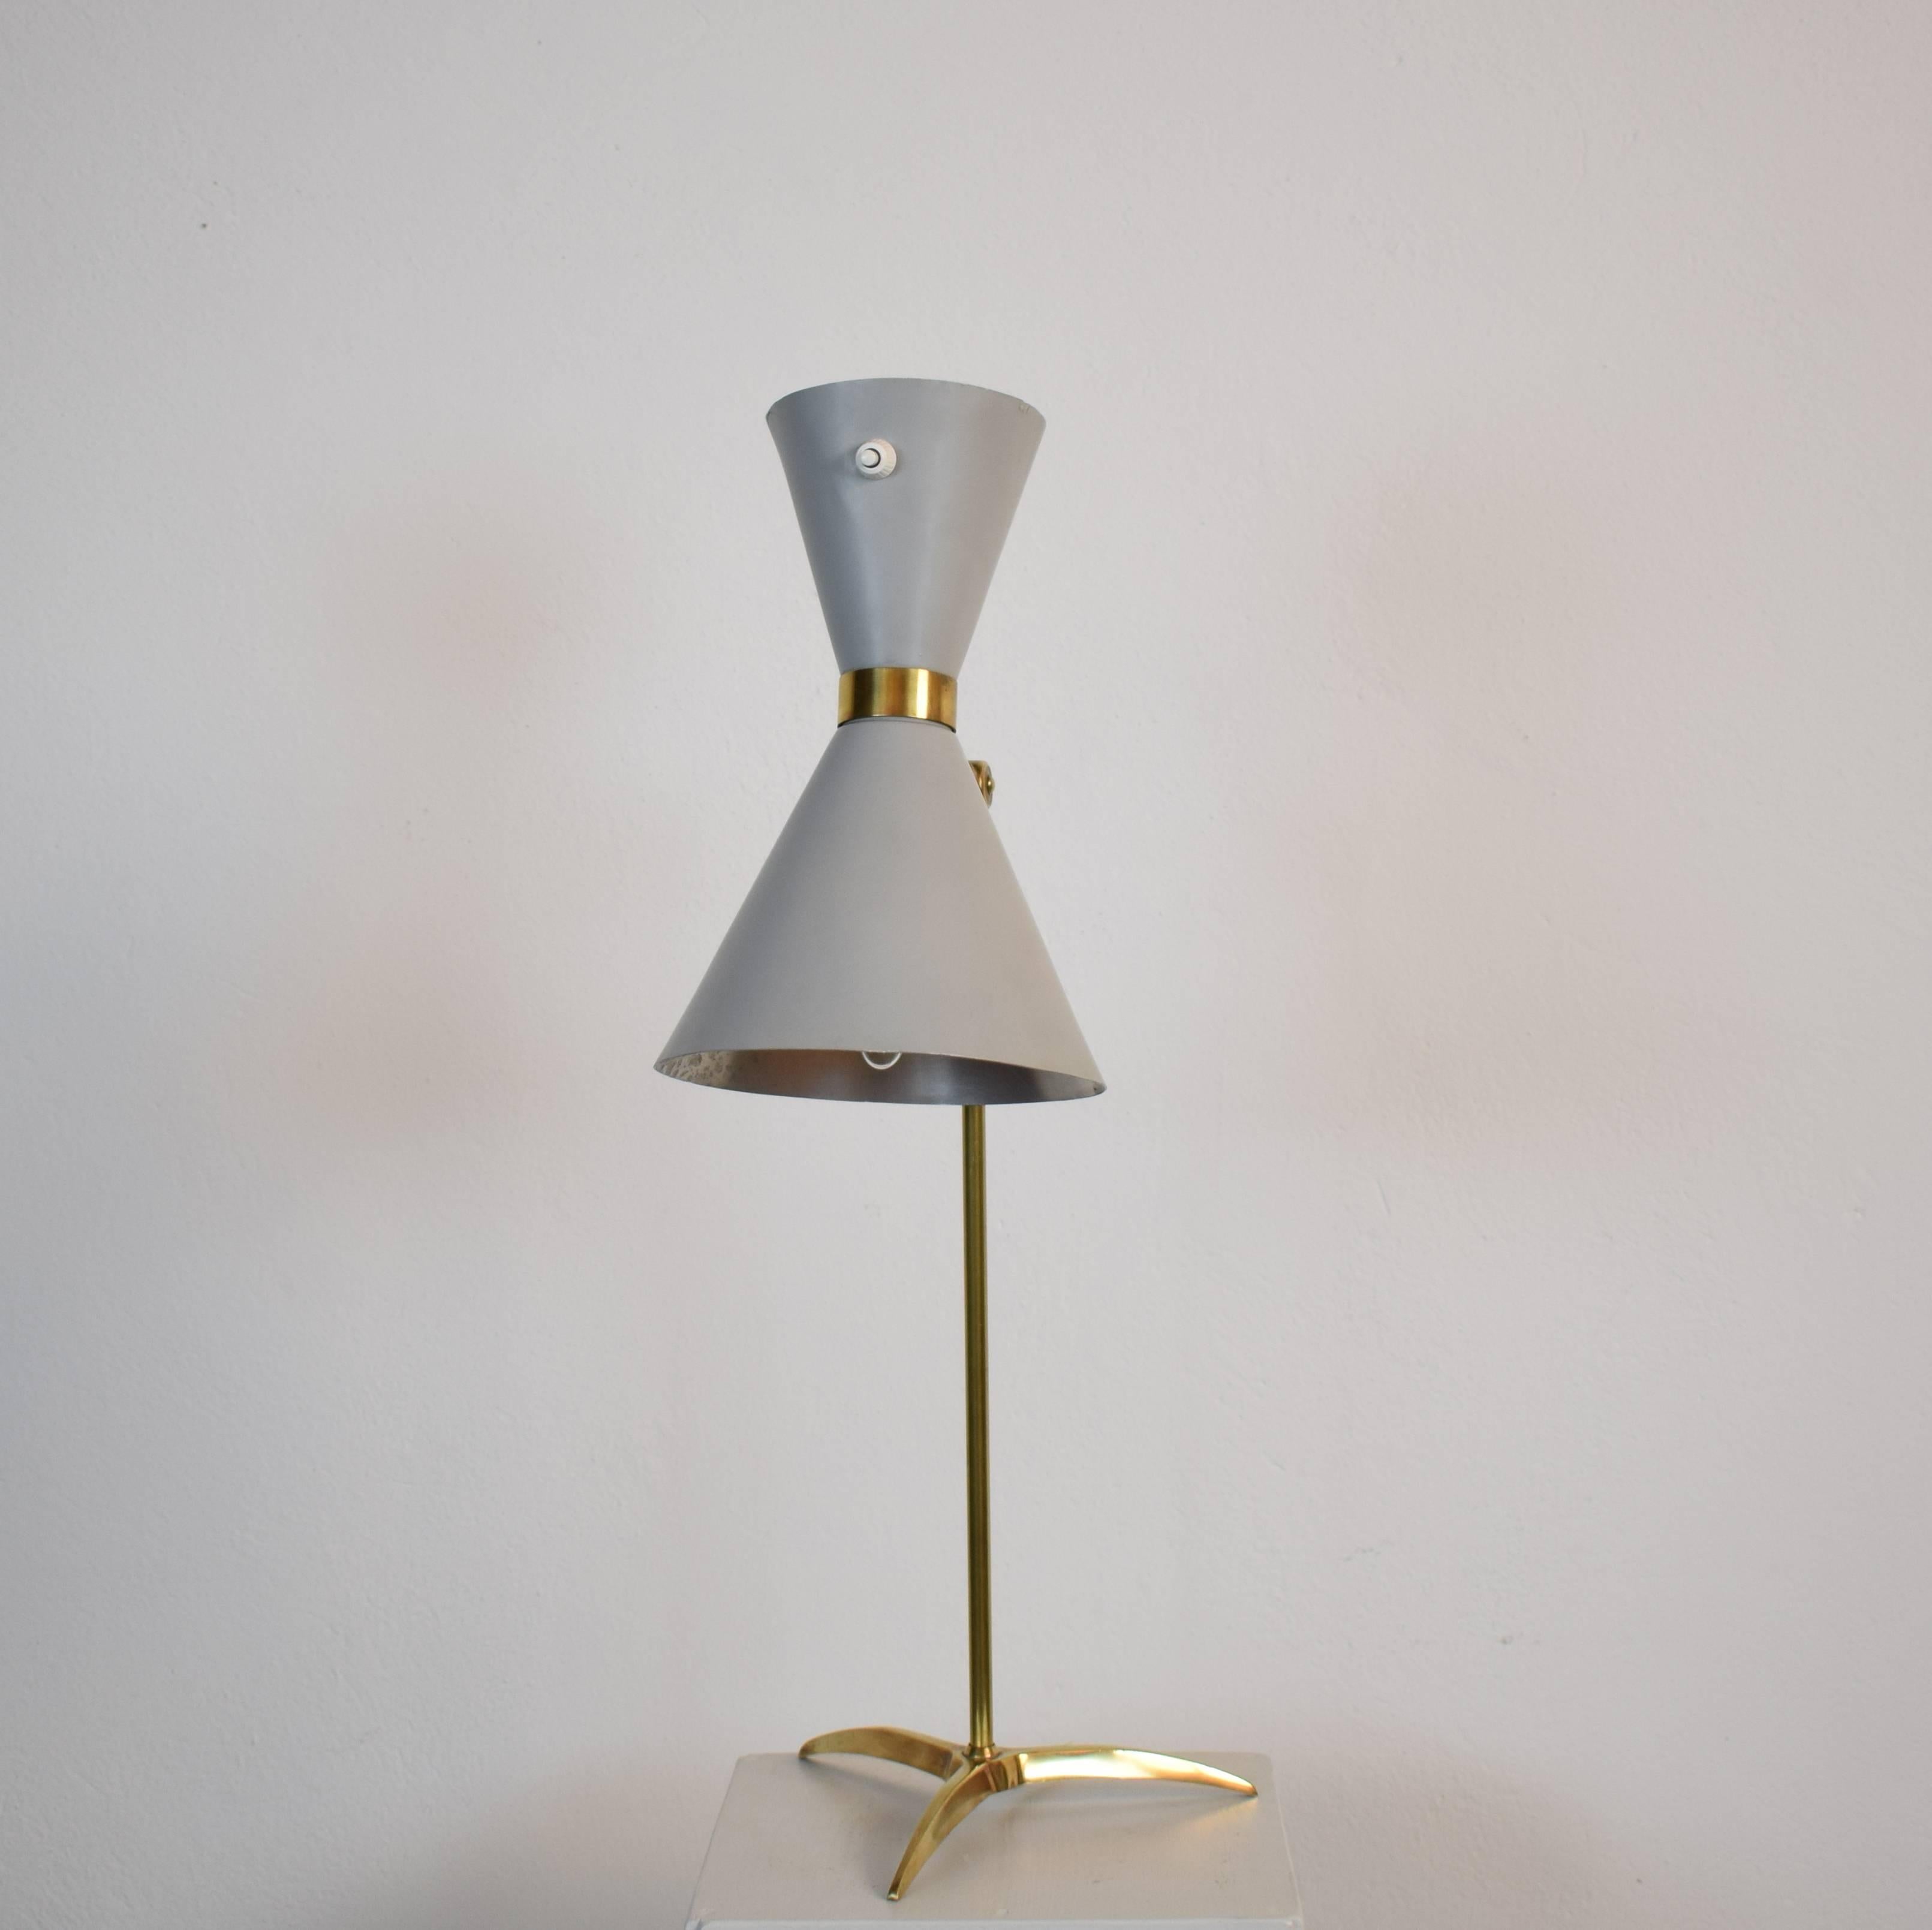 This Mid-Century Stilnovo table lamp has a grey Diavolo shade and brass fittings. It is very elegant.